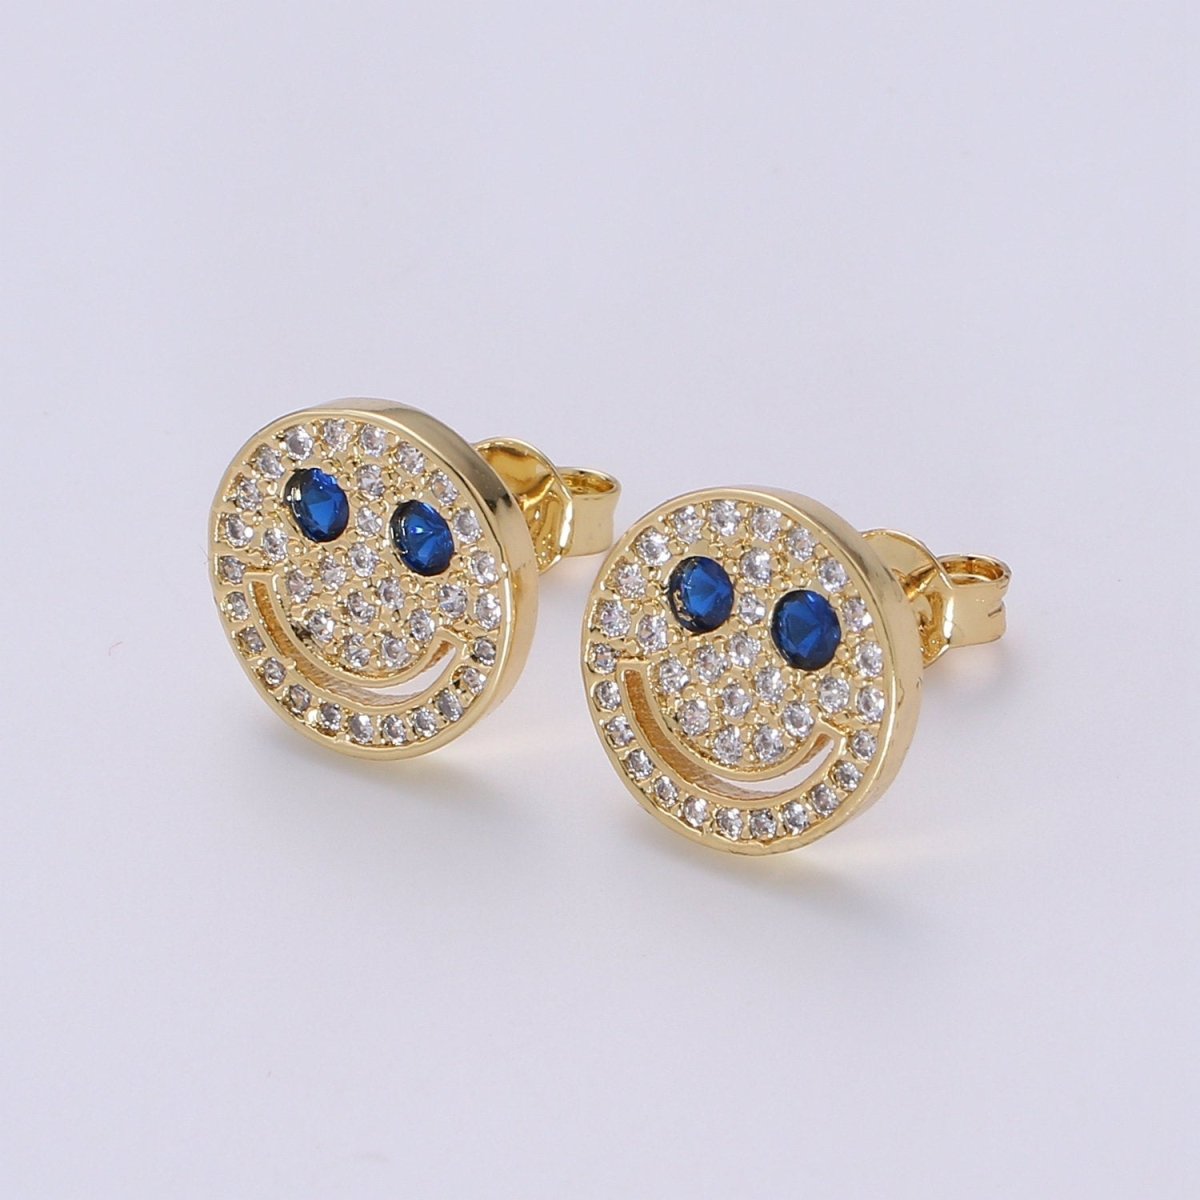 Cz Smiley face stud earrings, Tiny smiley face studs, simple gold stud earrings, Round Gold Studs, happy face studs, disc stud earrings Q-301 - Q-304 - DLUXCA